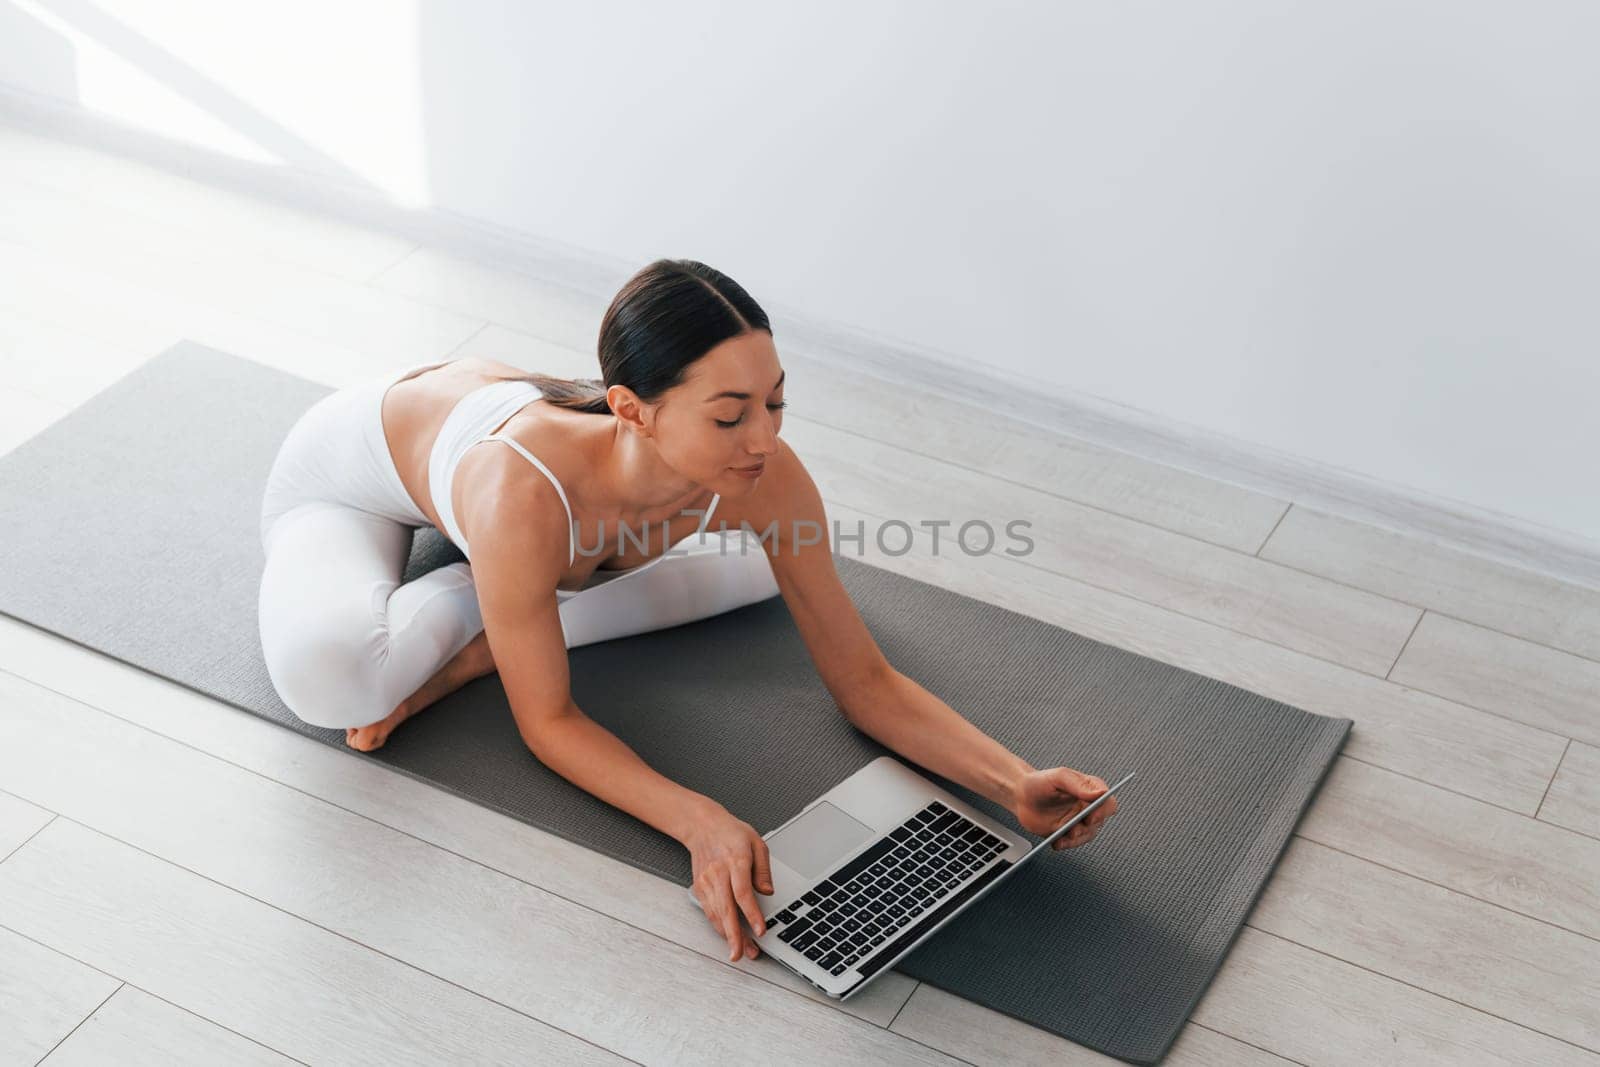 On yoga mat. Young caucasian woman with slim body shape is indoors at daytime.